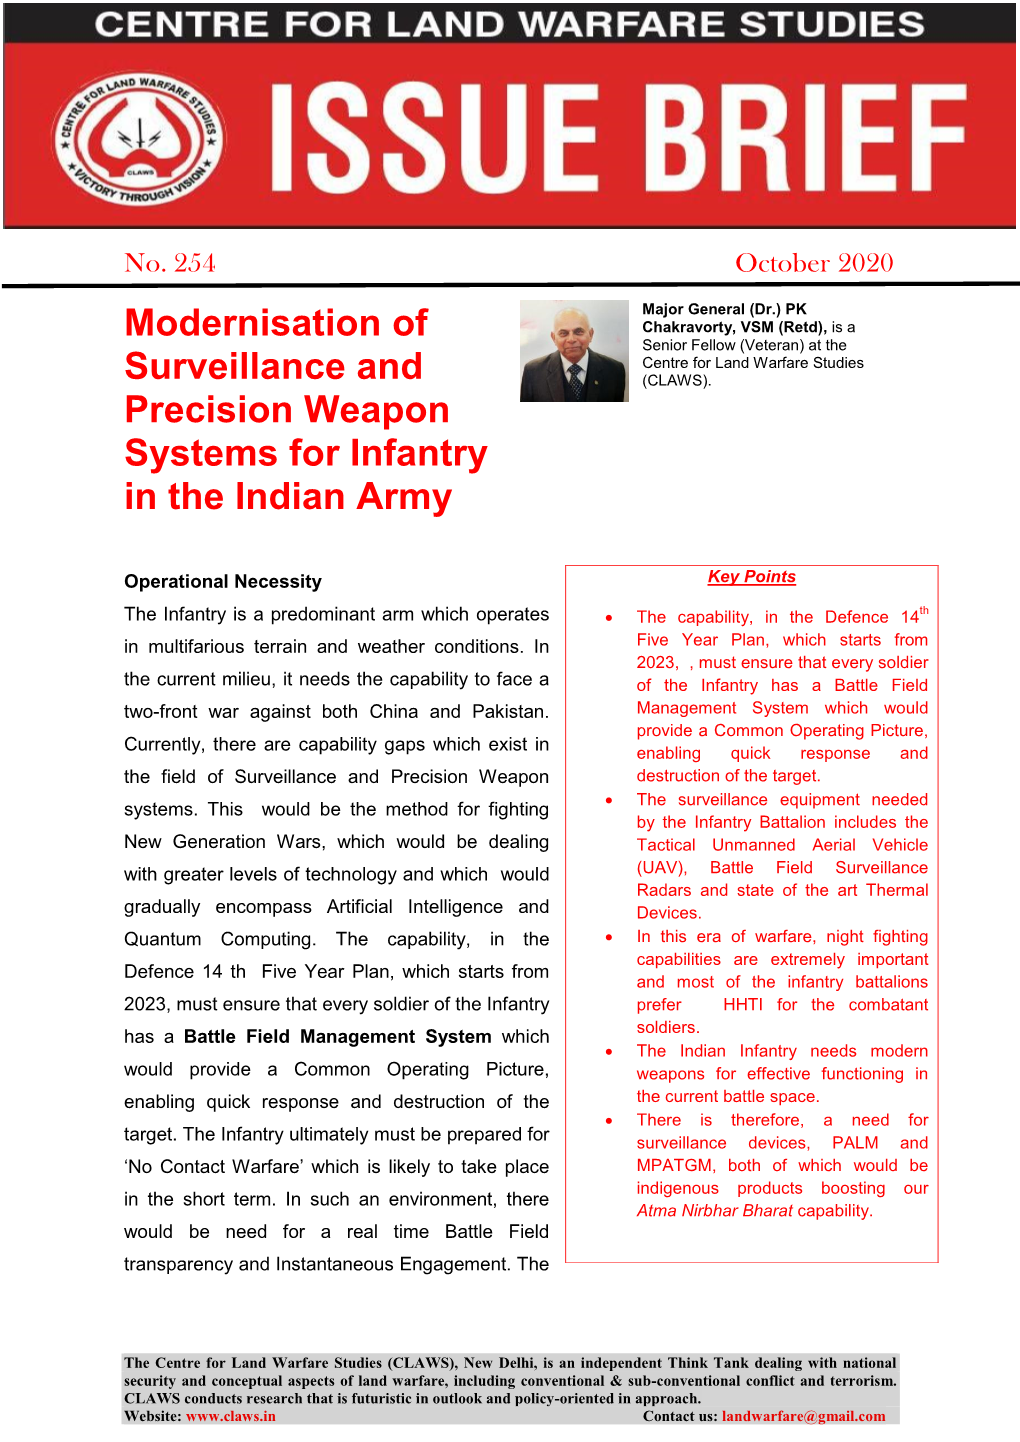 Modernisation of Surveillance and Precision Weapon Systems For